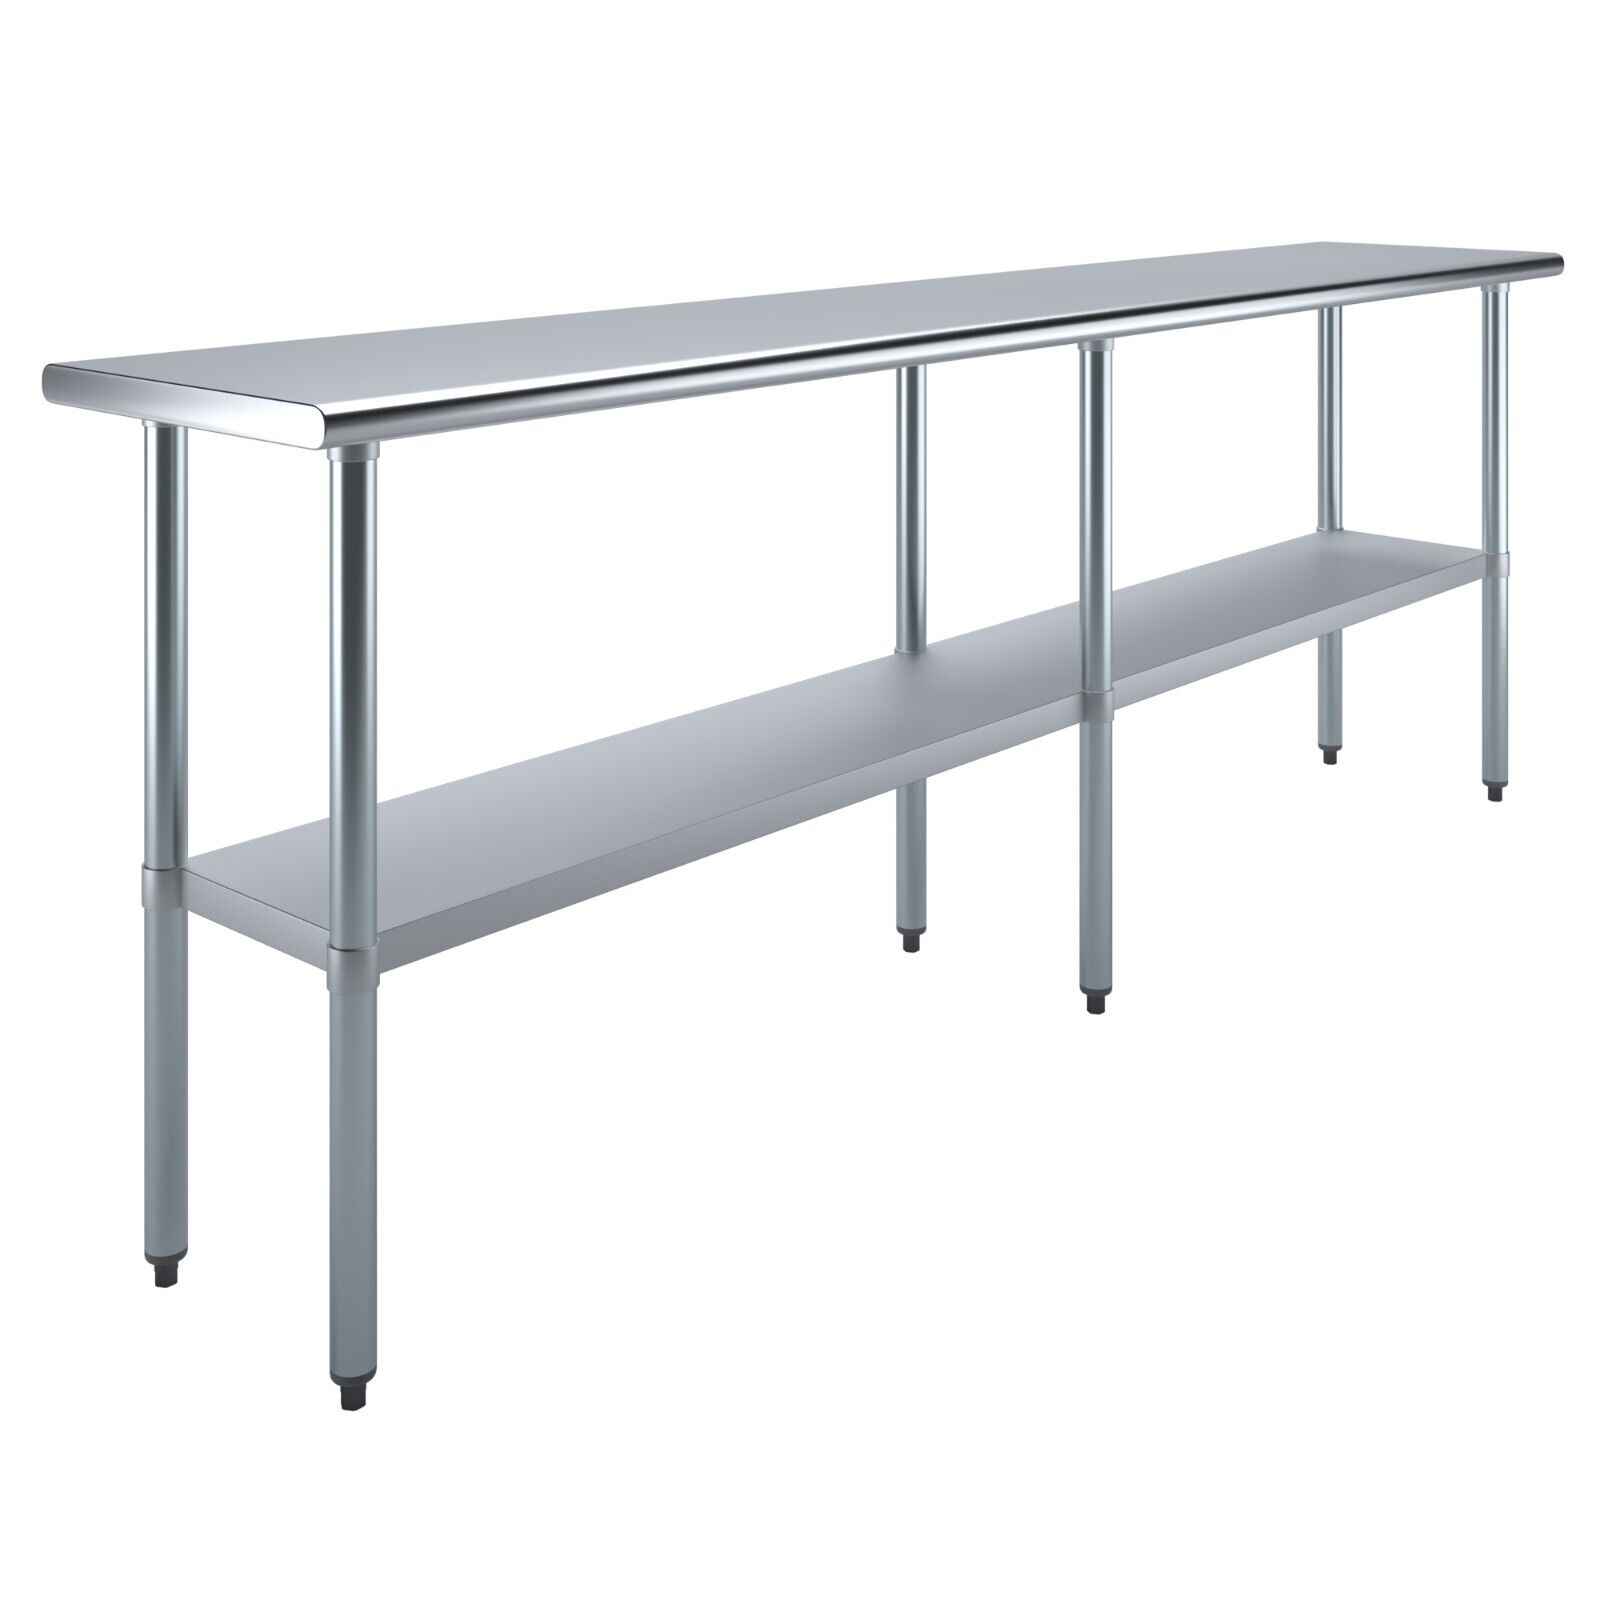 18 in. x 96 in. Stainless Steel Table